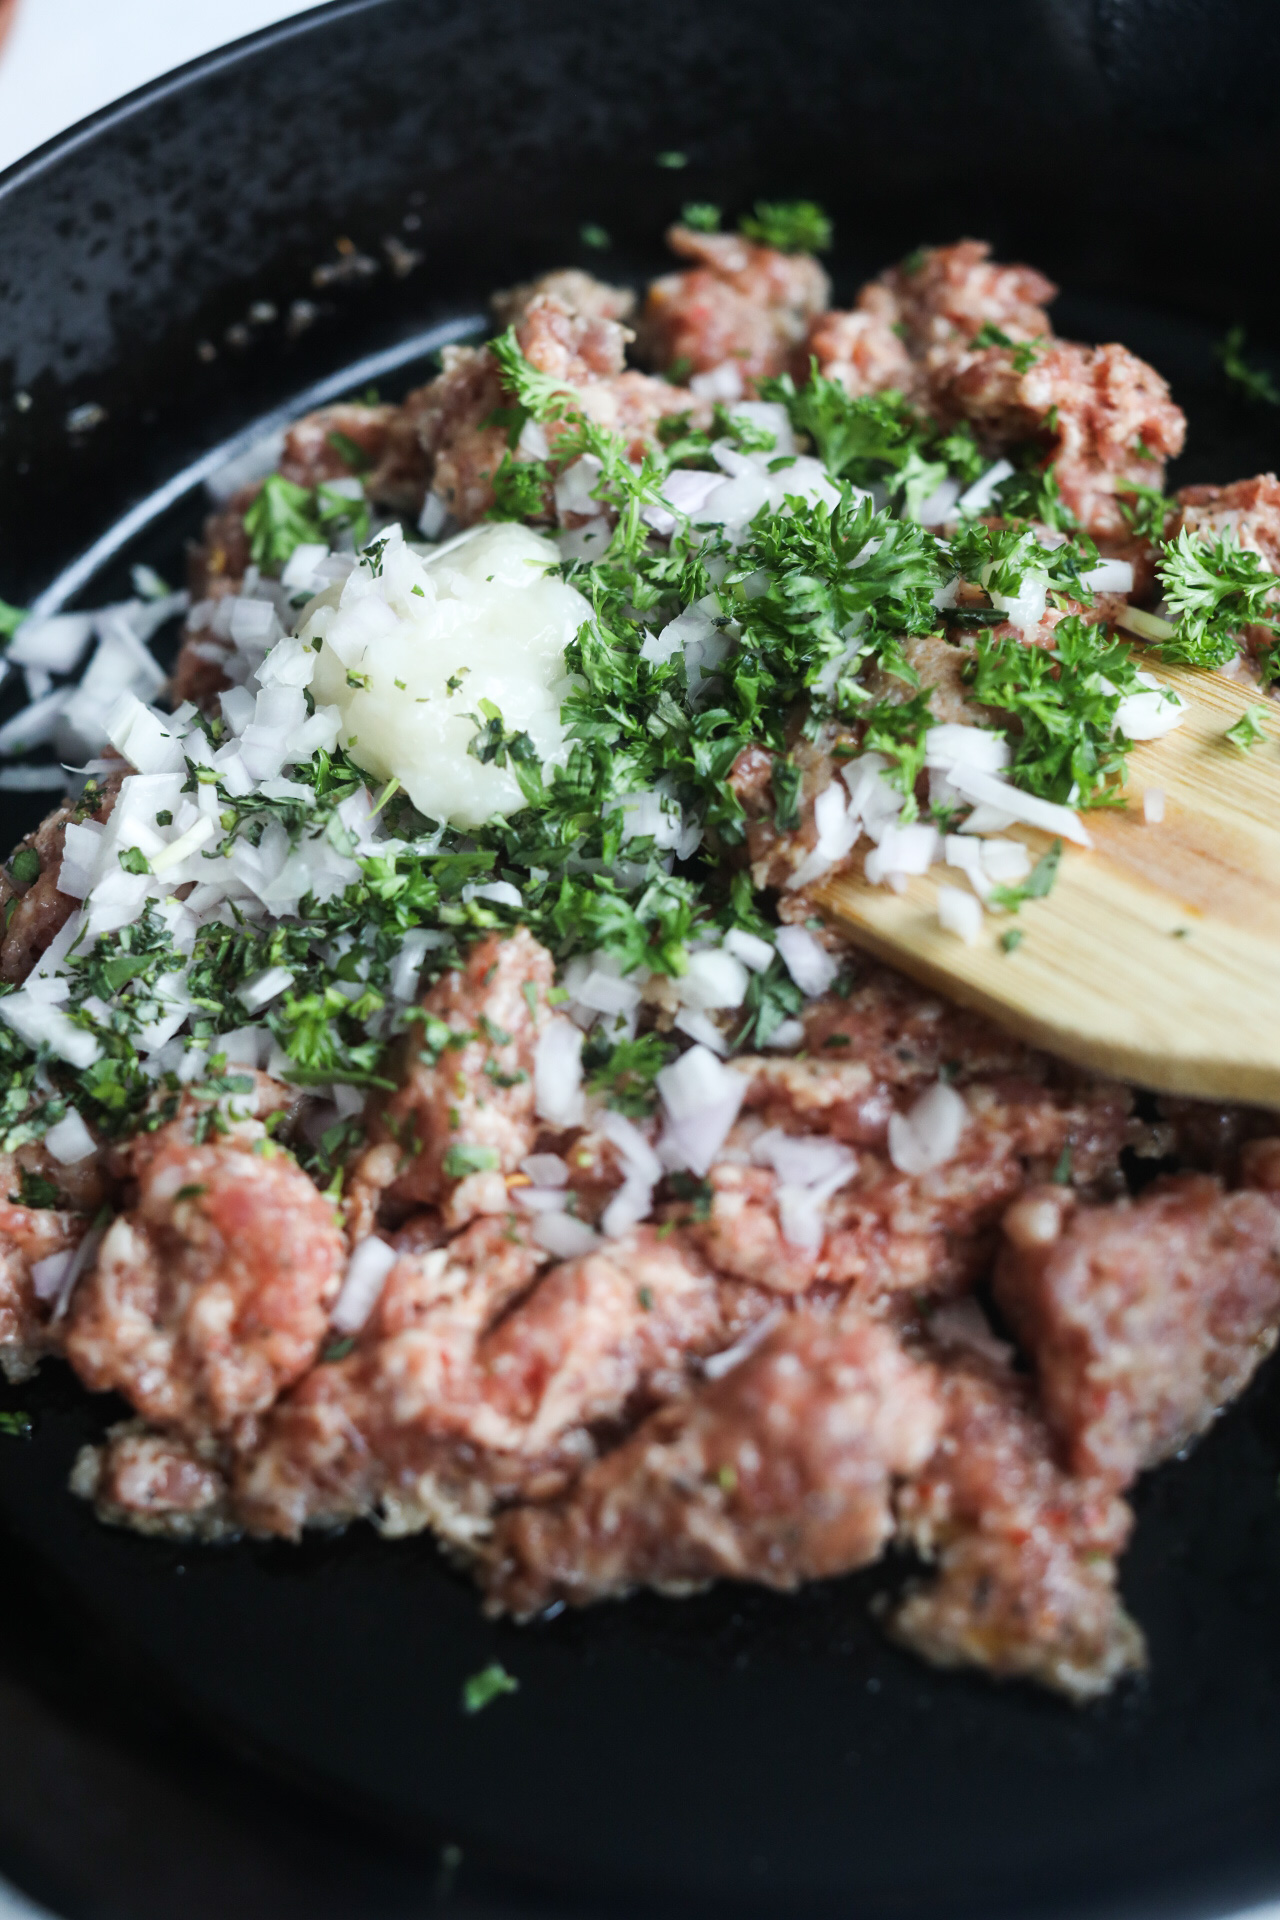 Par cooked ground beef and pork mixture in a black cast iron skillet topped with garlic paste, onion and fresh parsley. Wooden spoon is mixing ingredients.